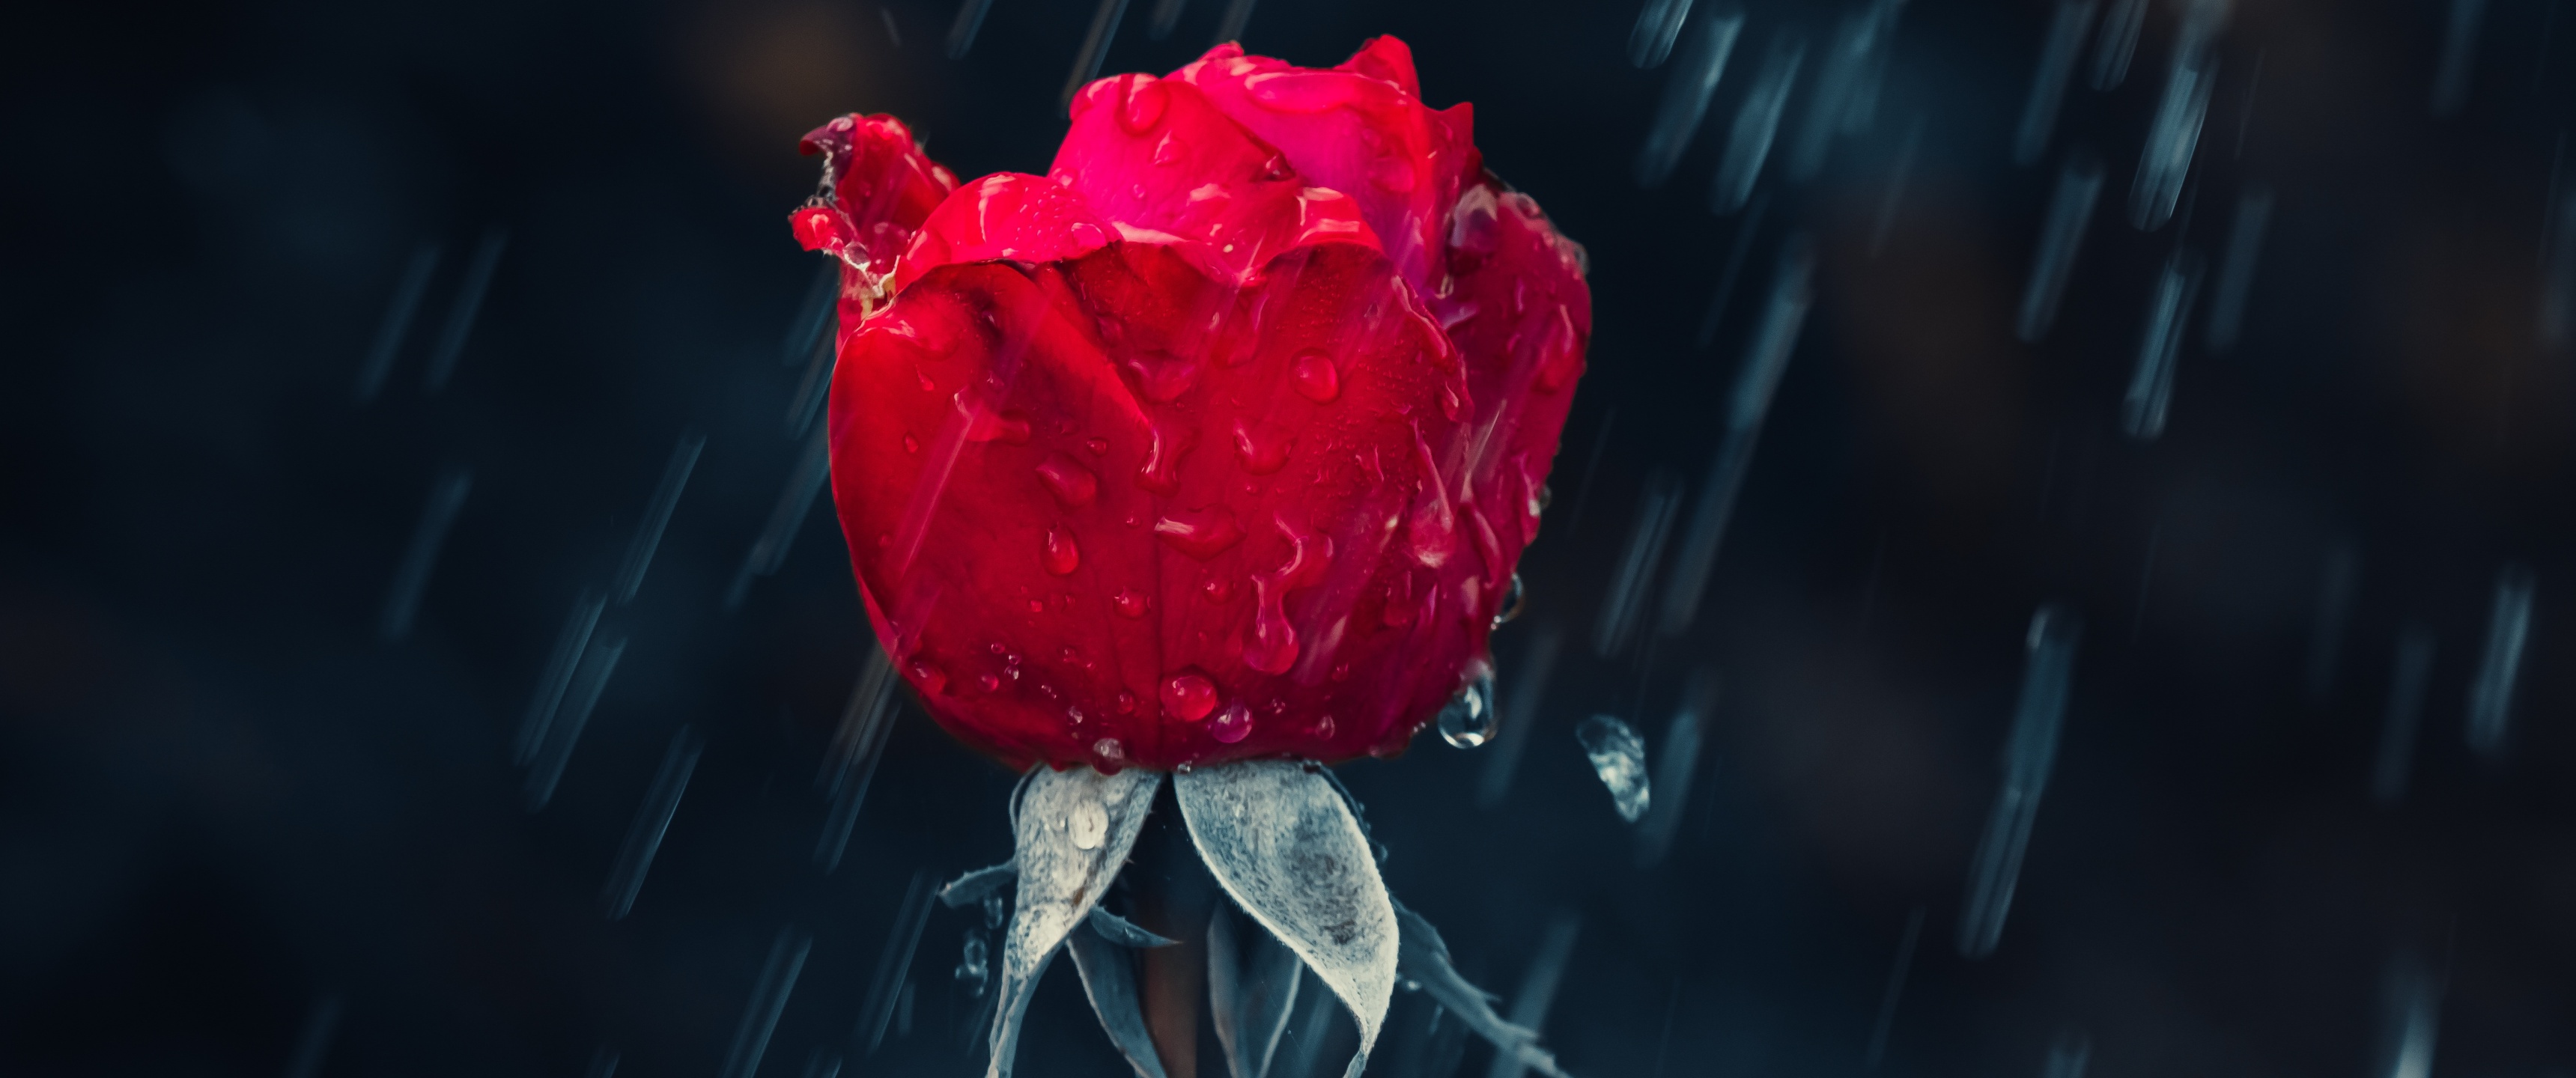 200+] Red Rose Wallpapers | Wallpapers.com